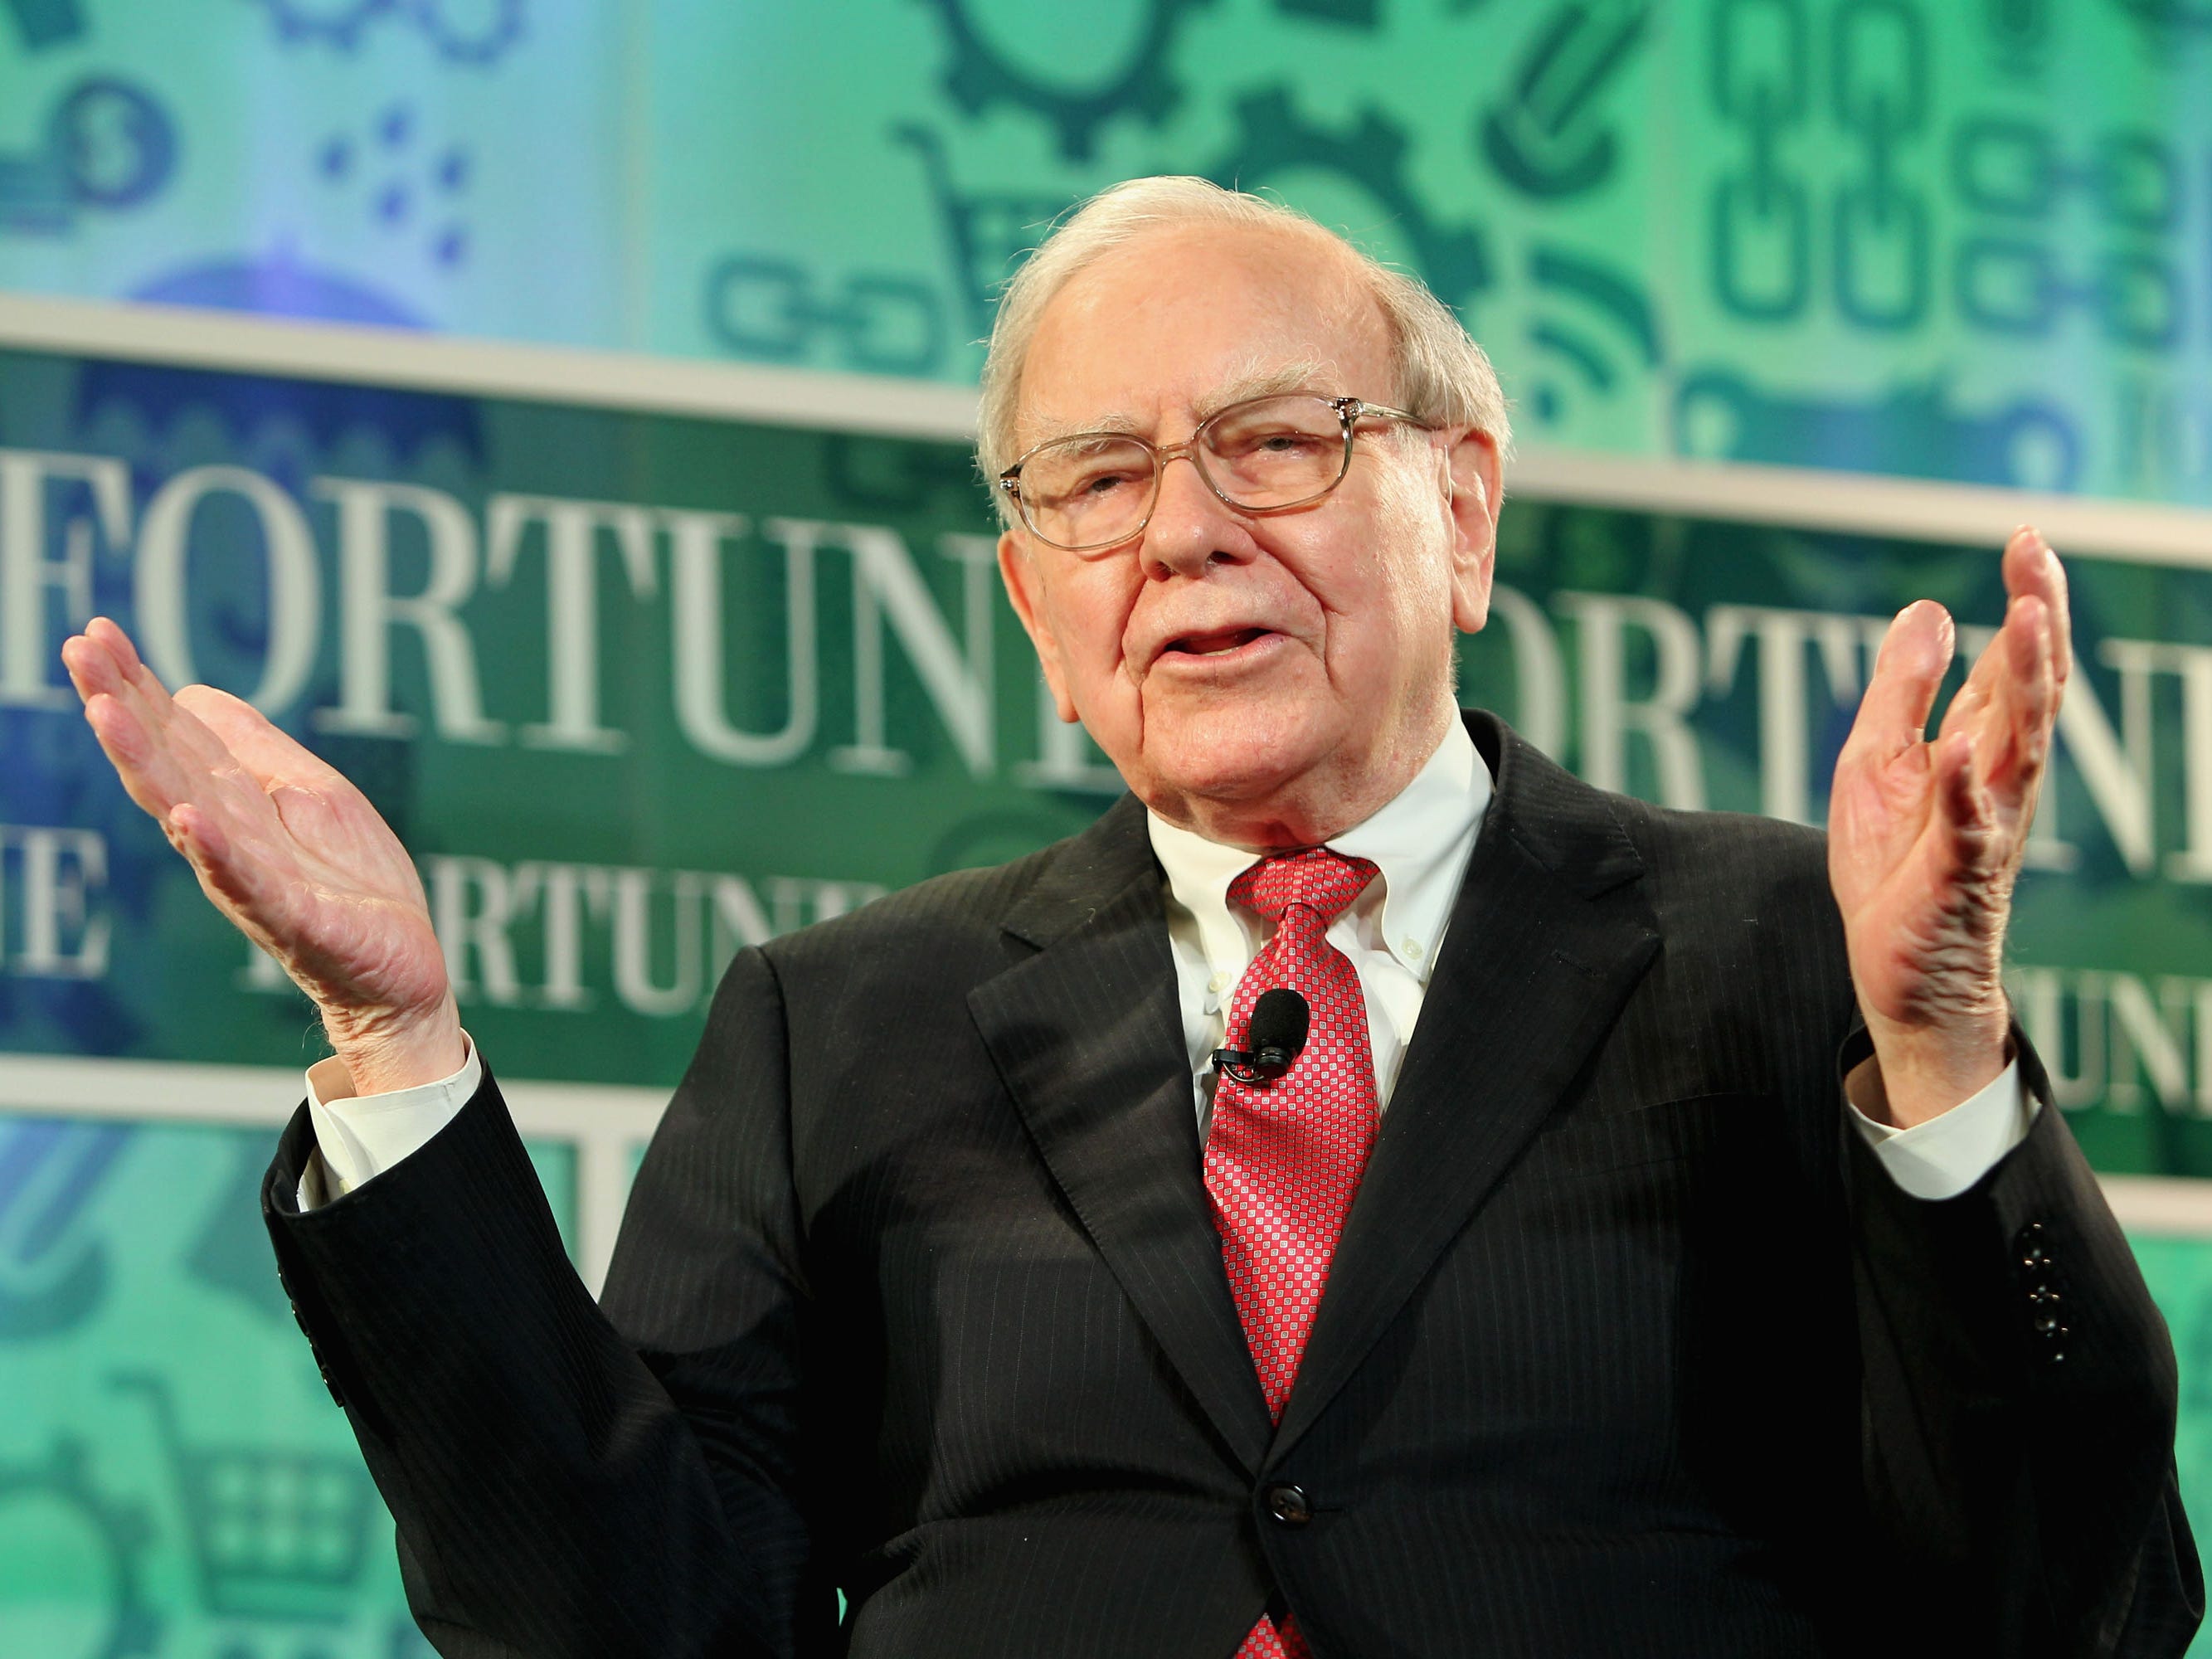 <p>The CEO of Berkshire Hathaway began <a href="https://markets.businessinsider.com/news/stocks/warren-buffet-investing-advice-for-young-wannabes-proper-attitude-2020-4-1029143514">building his wealth by investing</a> in the stock market at age 11, according to <a href="https://www.forbes.com/profile/warren-buffett/?list=forbes-400#7af88ecd4639" rel="noopener">Forbes</a>, and first filed his taxes at the age of 13. As a teenager, he was raking in about $175 a month by <a href="https://www.businessinsider.com/how-a-young-warren-buffett-made-money-2014-11">delivering The Washington Post</a> — more than his teachers (and most adults). He also sold calendars, used golf balls, and stamps. He had amassed the equivalent of $53,000 by the time he was just 16.</p>